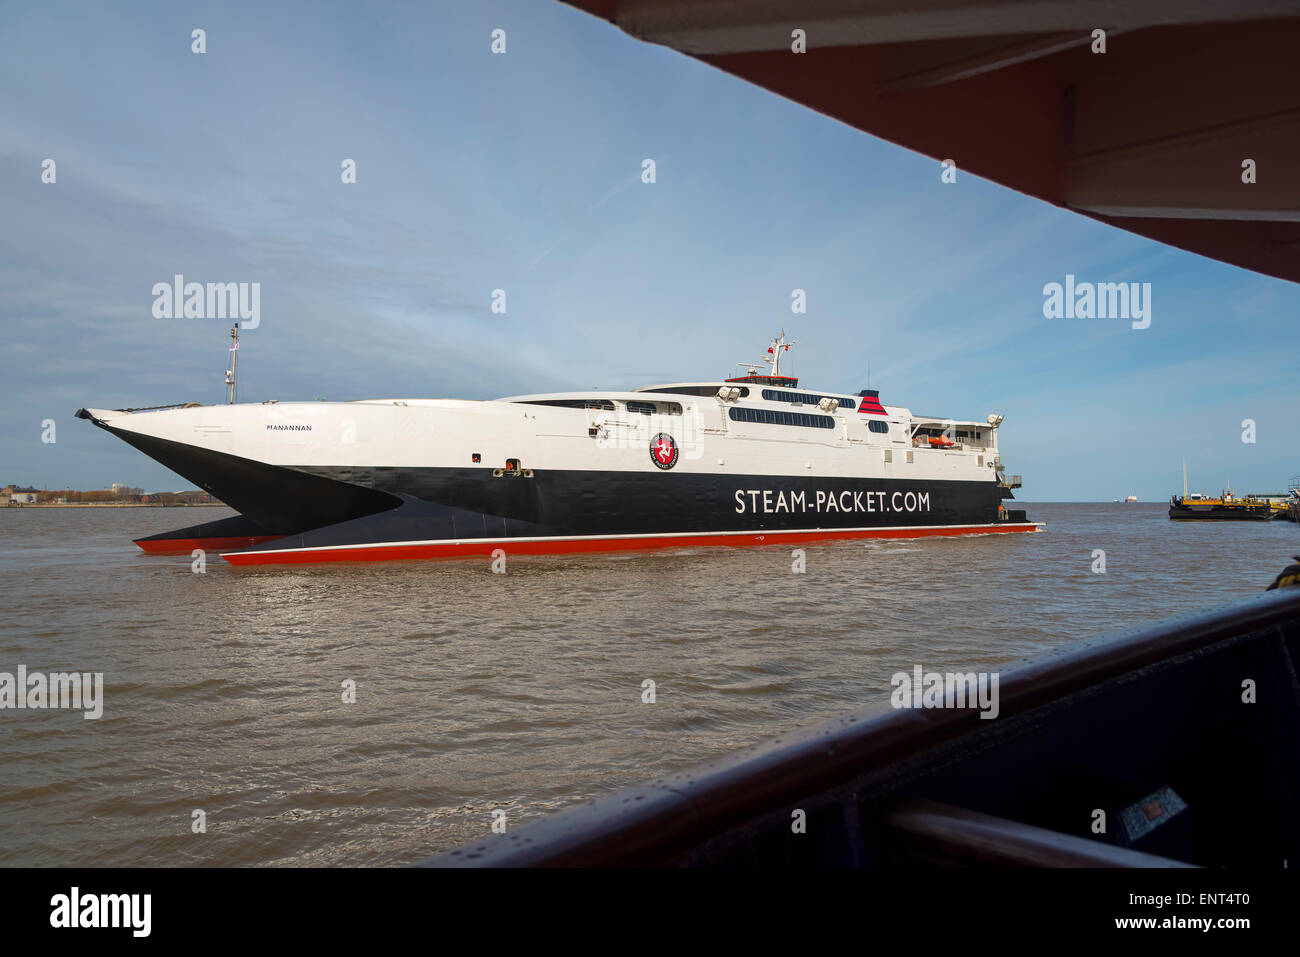 The Isle of Mann Steam Packet Company catamaran the Manannan in the river Mersey. IOMSP. High speed car ferry. Stock Photo